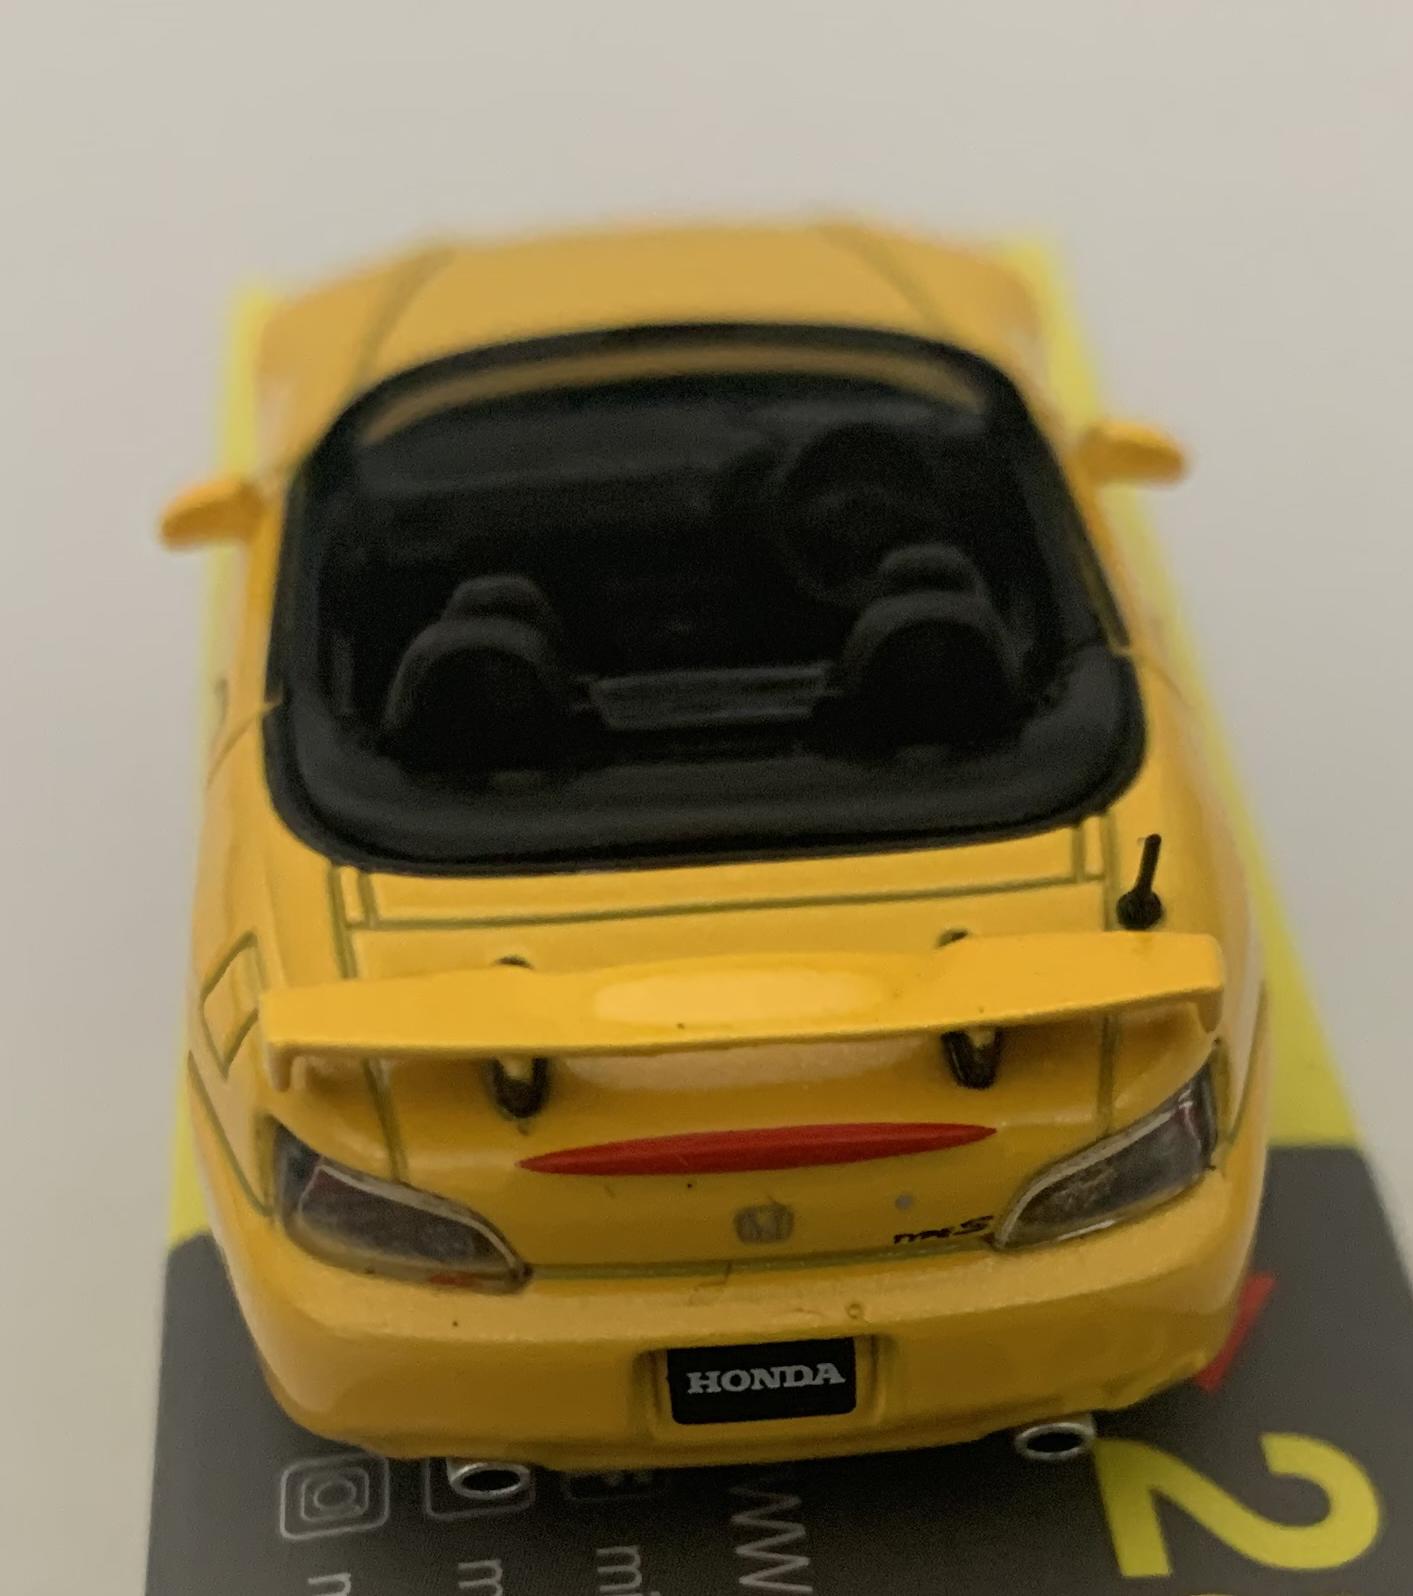 Honda S2000 Type S in new indy yellow pearl 1:64 scale model from Mini GT